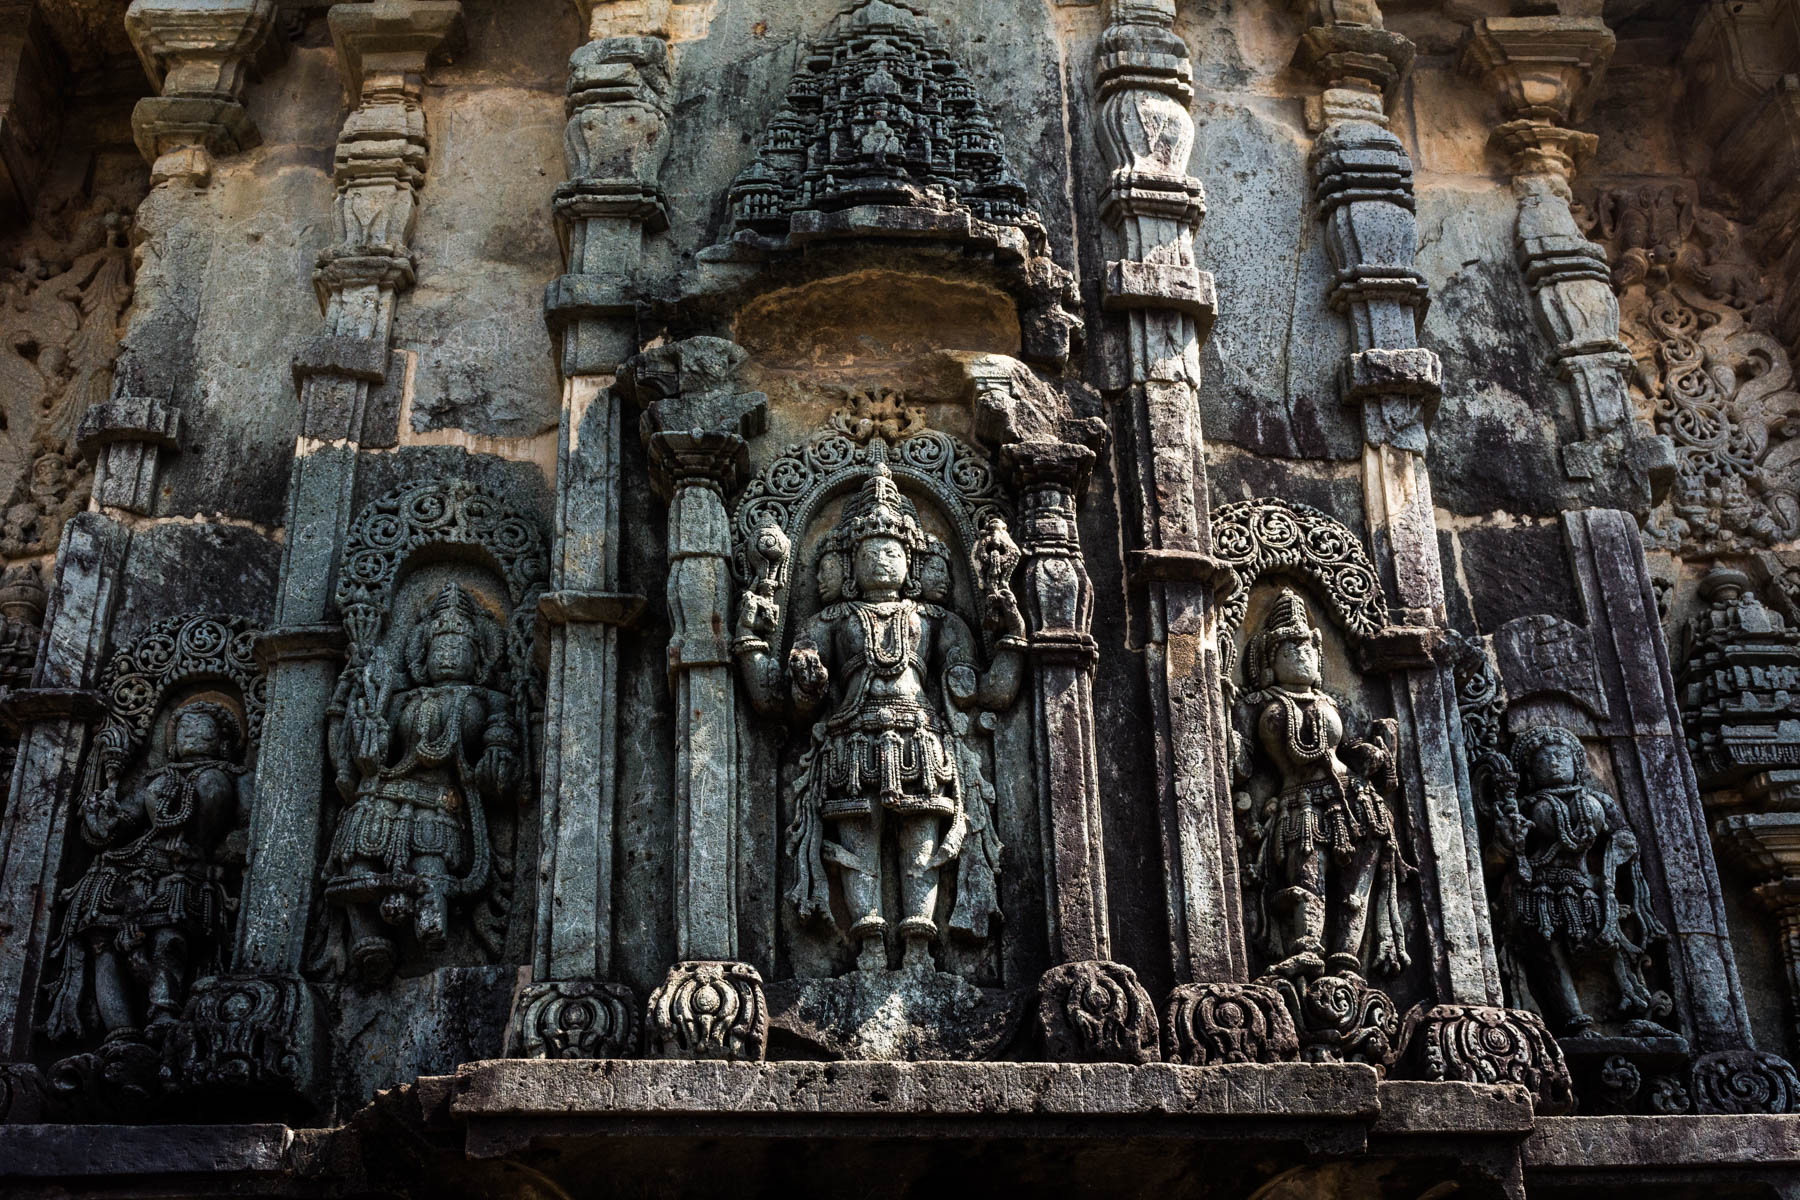 Off the beaten track places to visit in Karnataka, India - Detailed stone carvings on the Chennakesava temple - Lost With Purpose